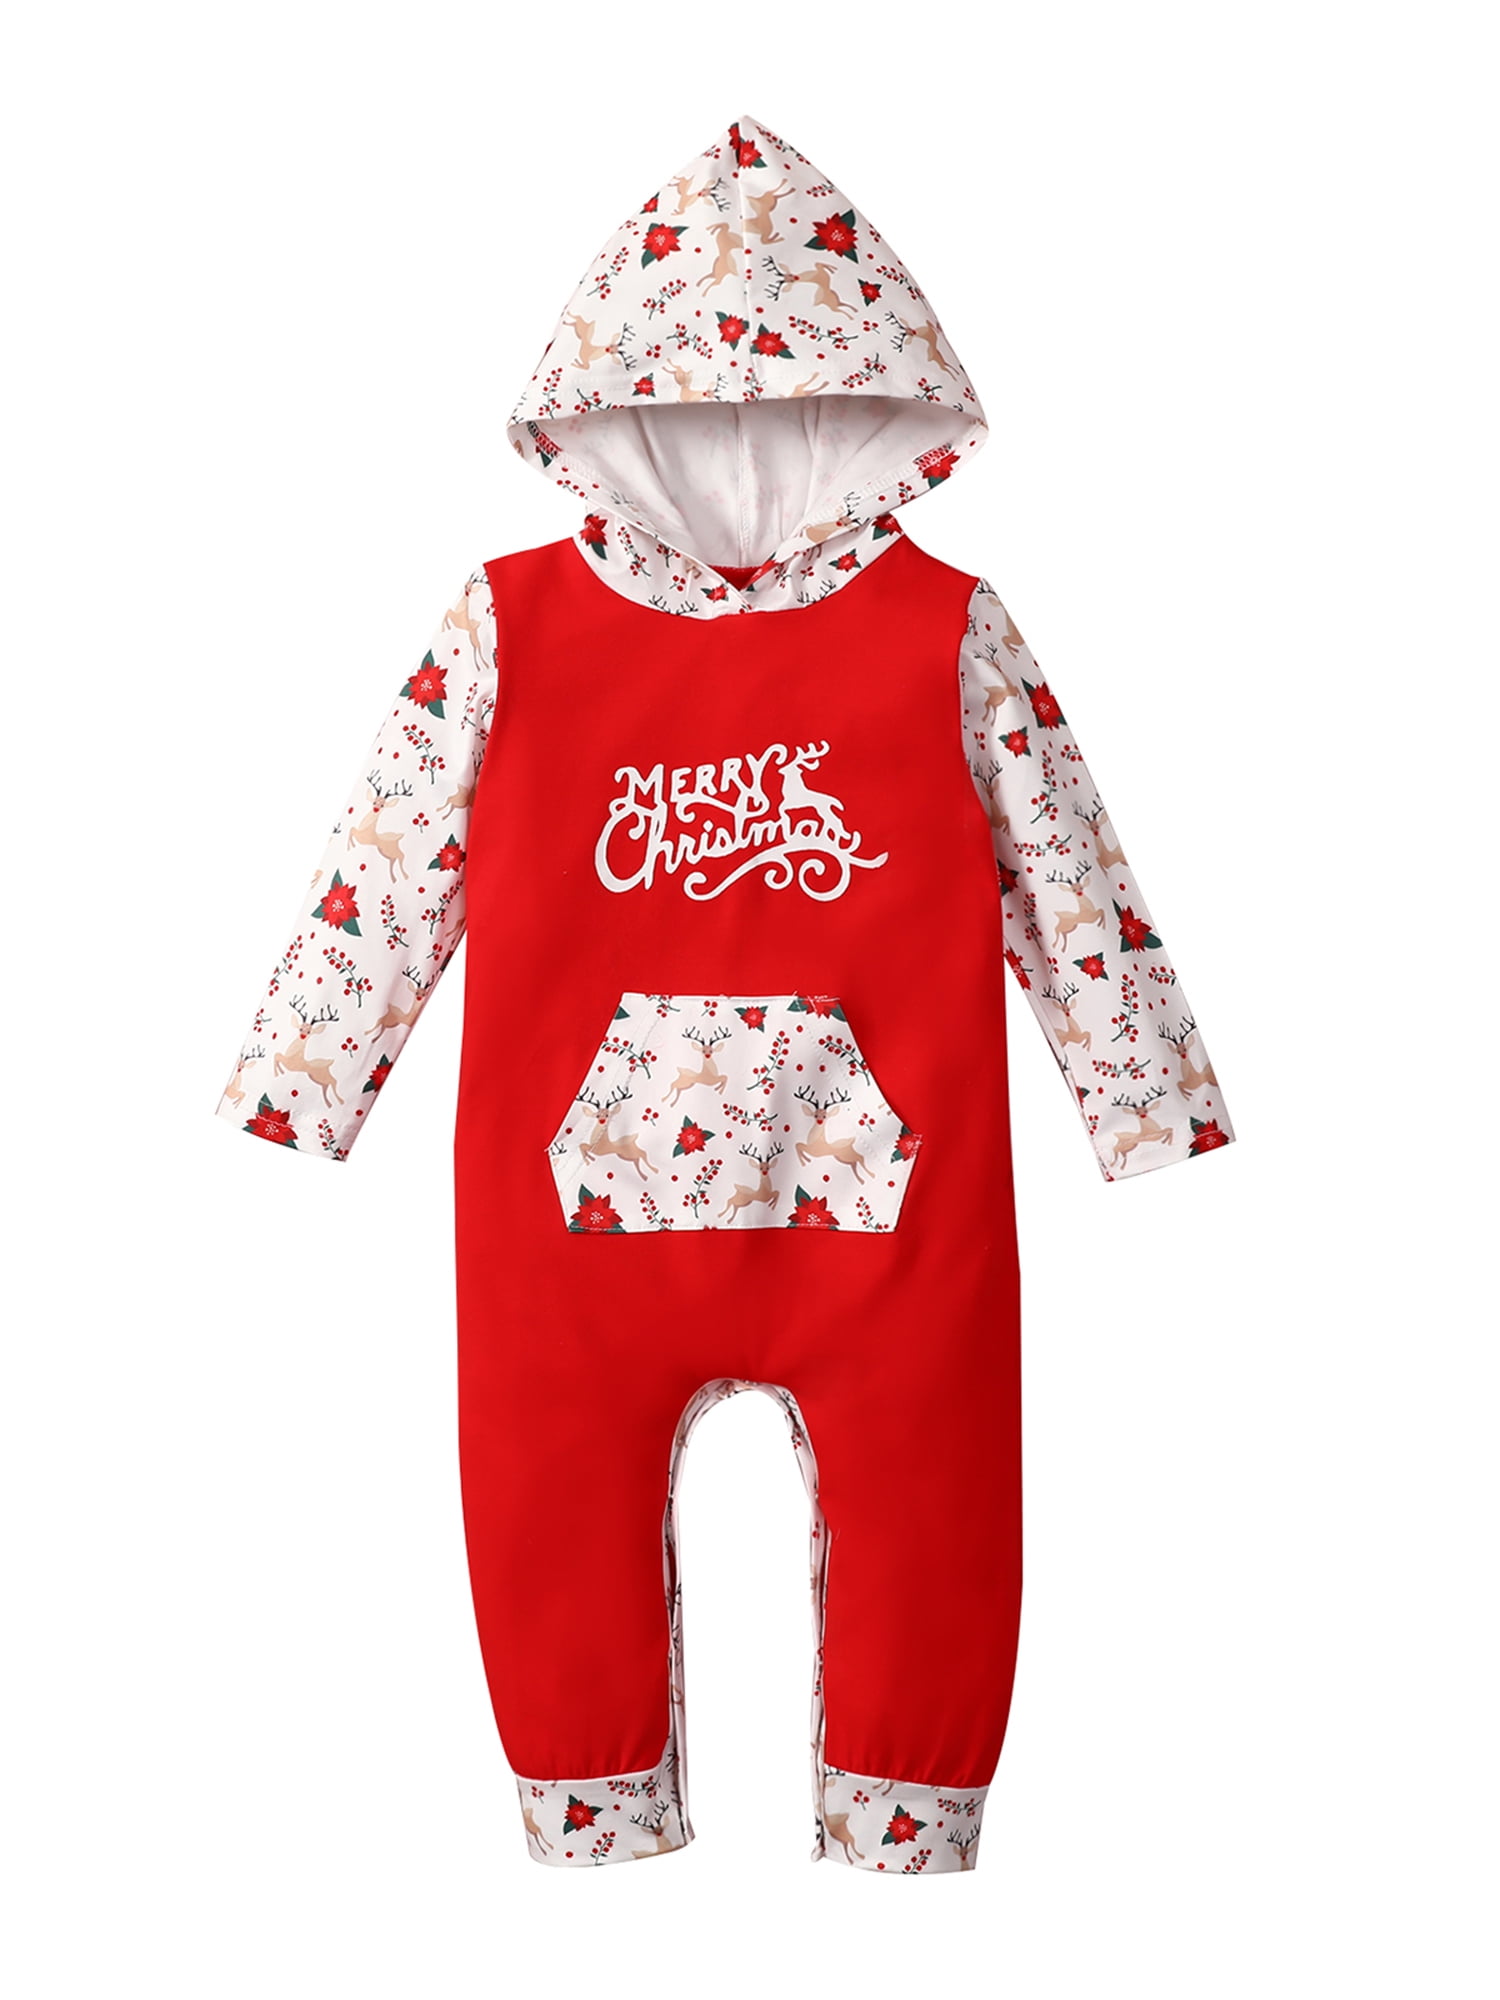 Baby Girls Woodland Winter Romper red Christmas outfit sets 0-3 3-6 